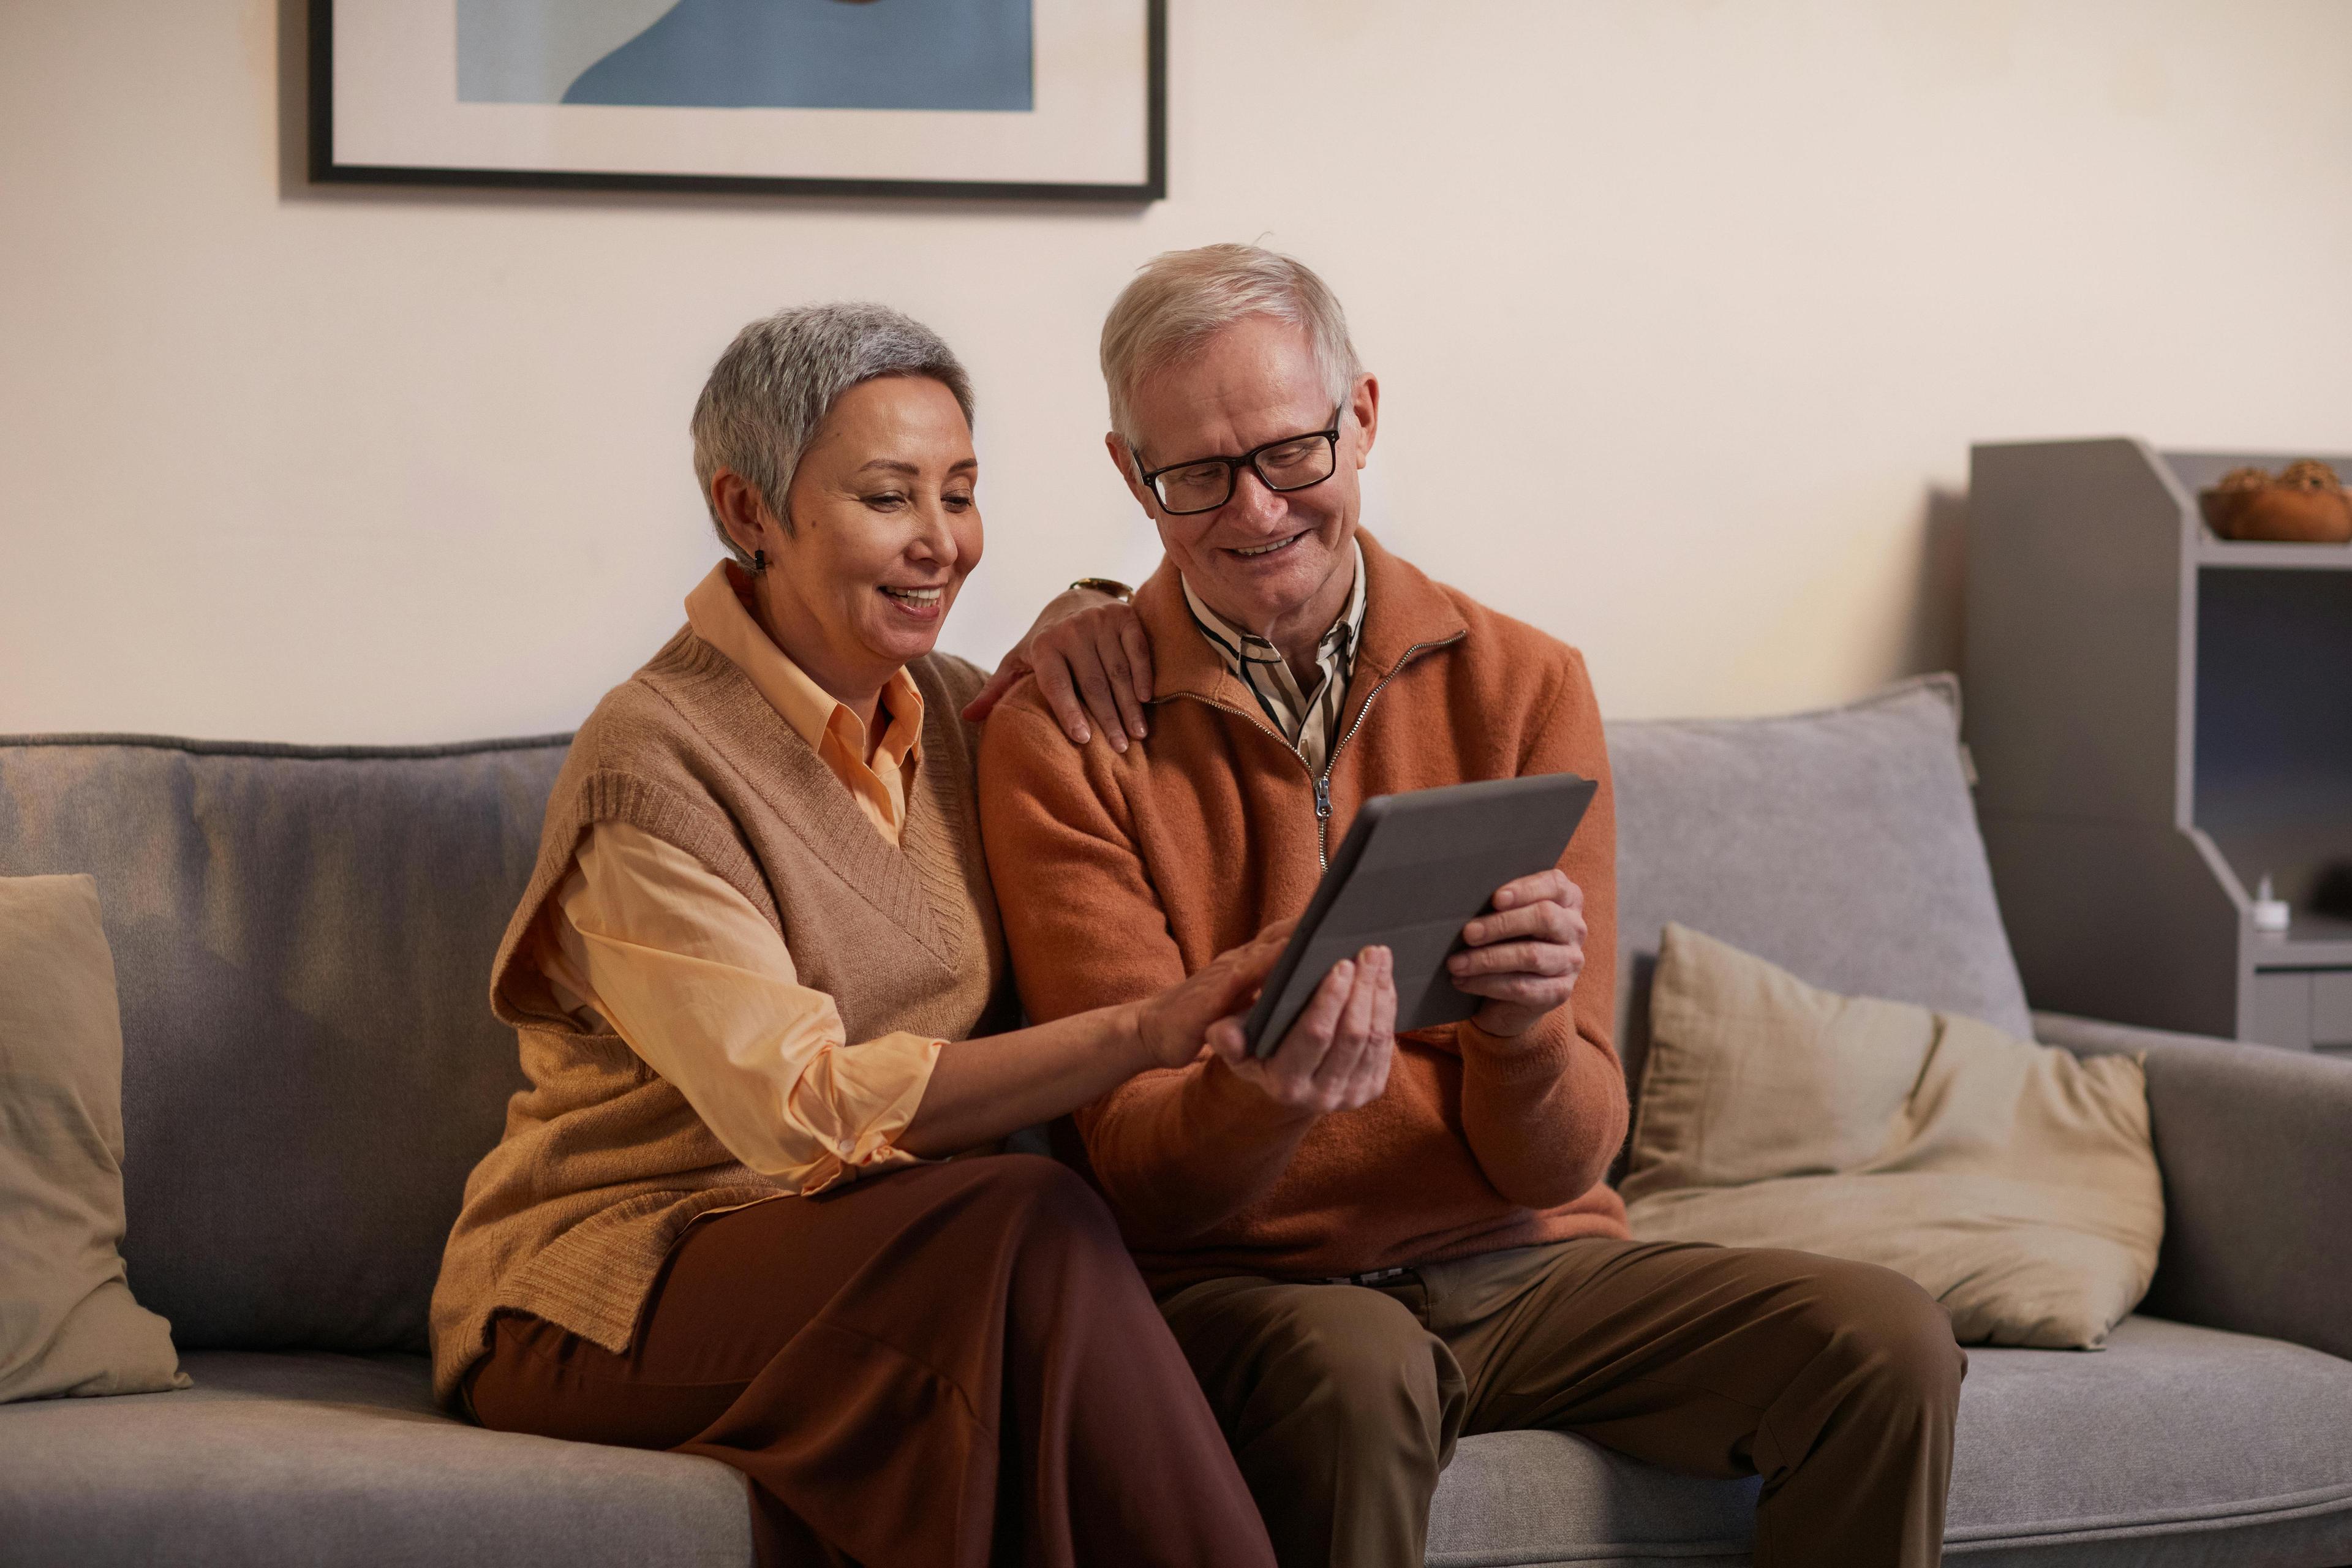  Senior couple sitting on sofa, using tablet for help with relationship.